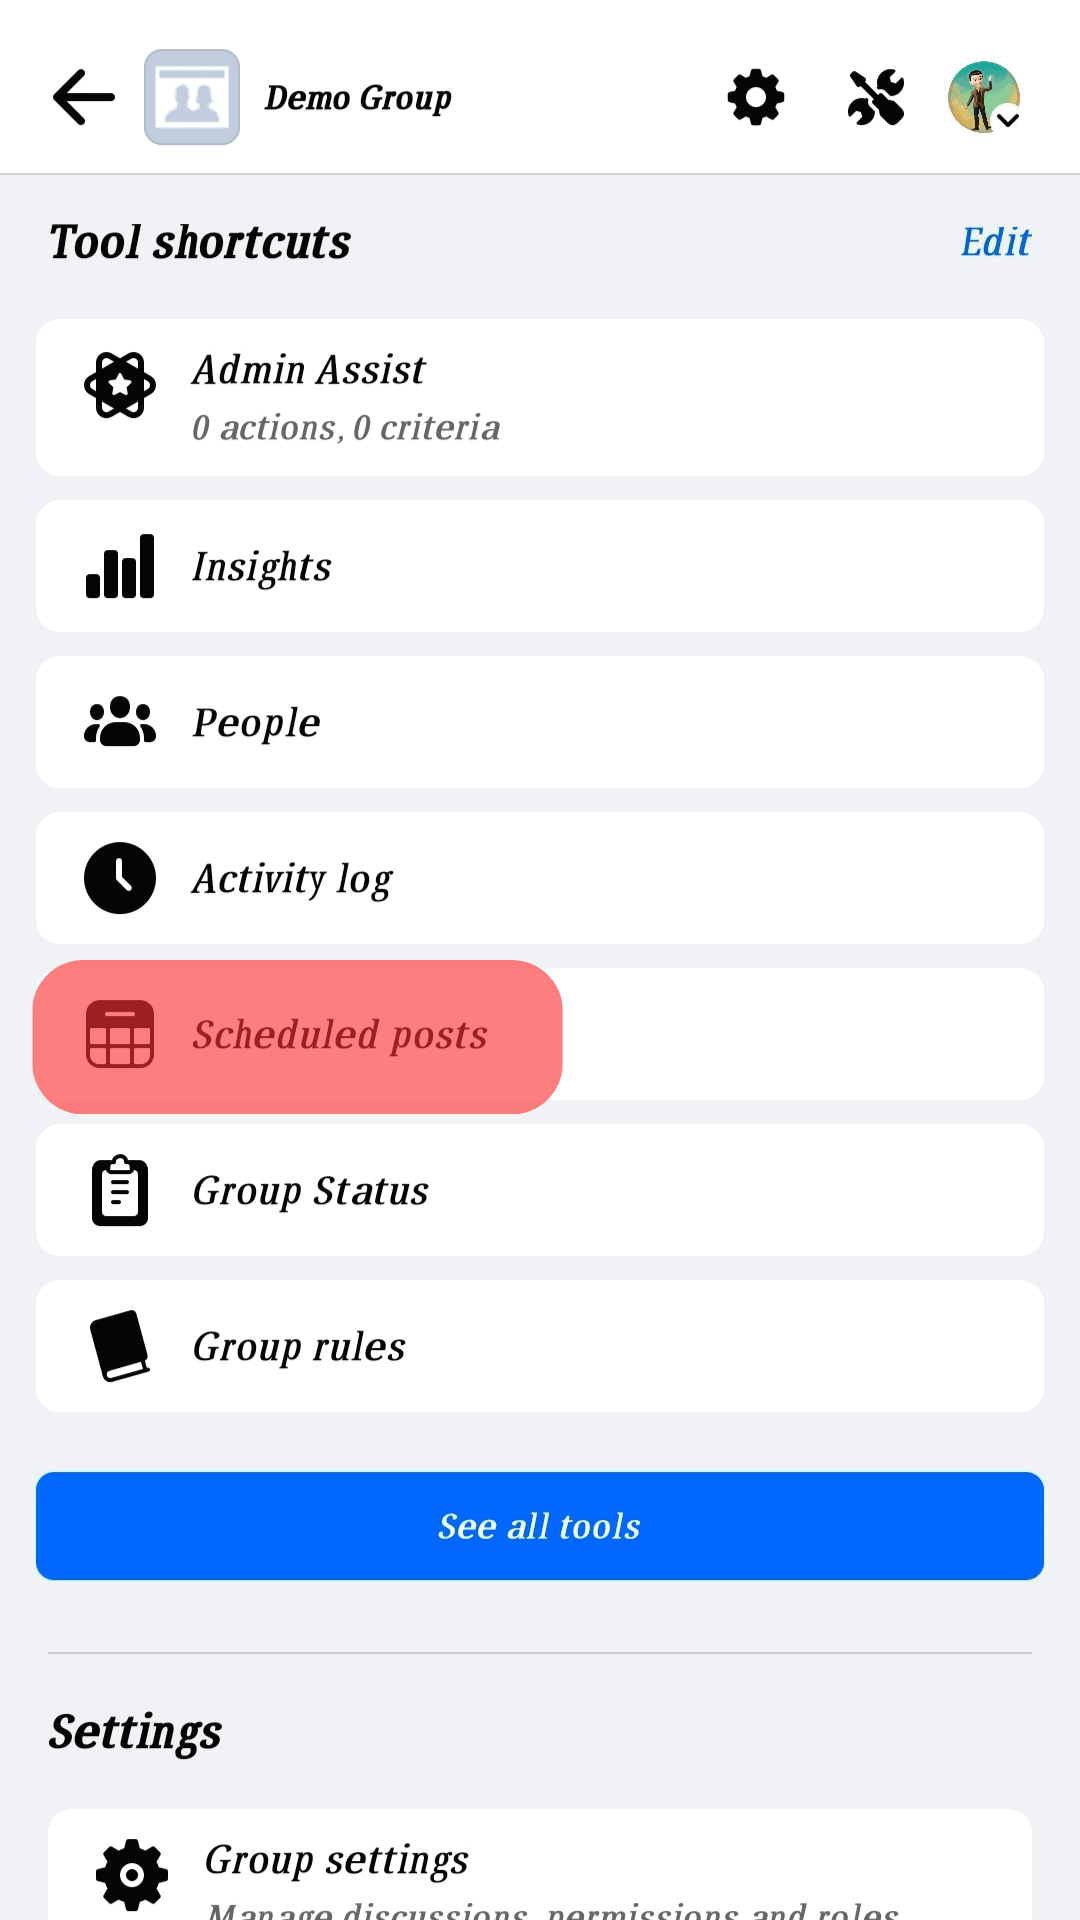 Select The Option For Scheduled Posts.